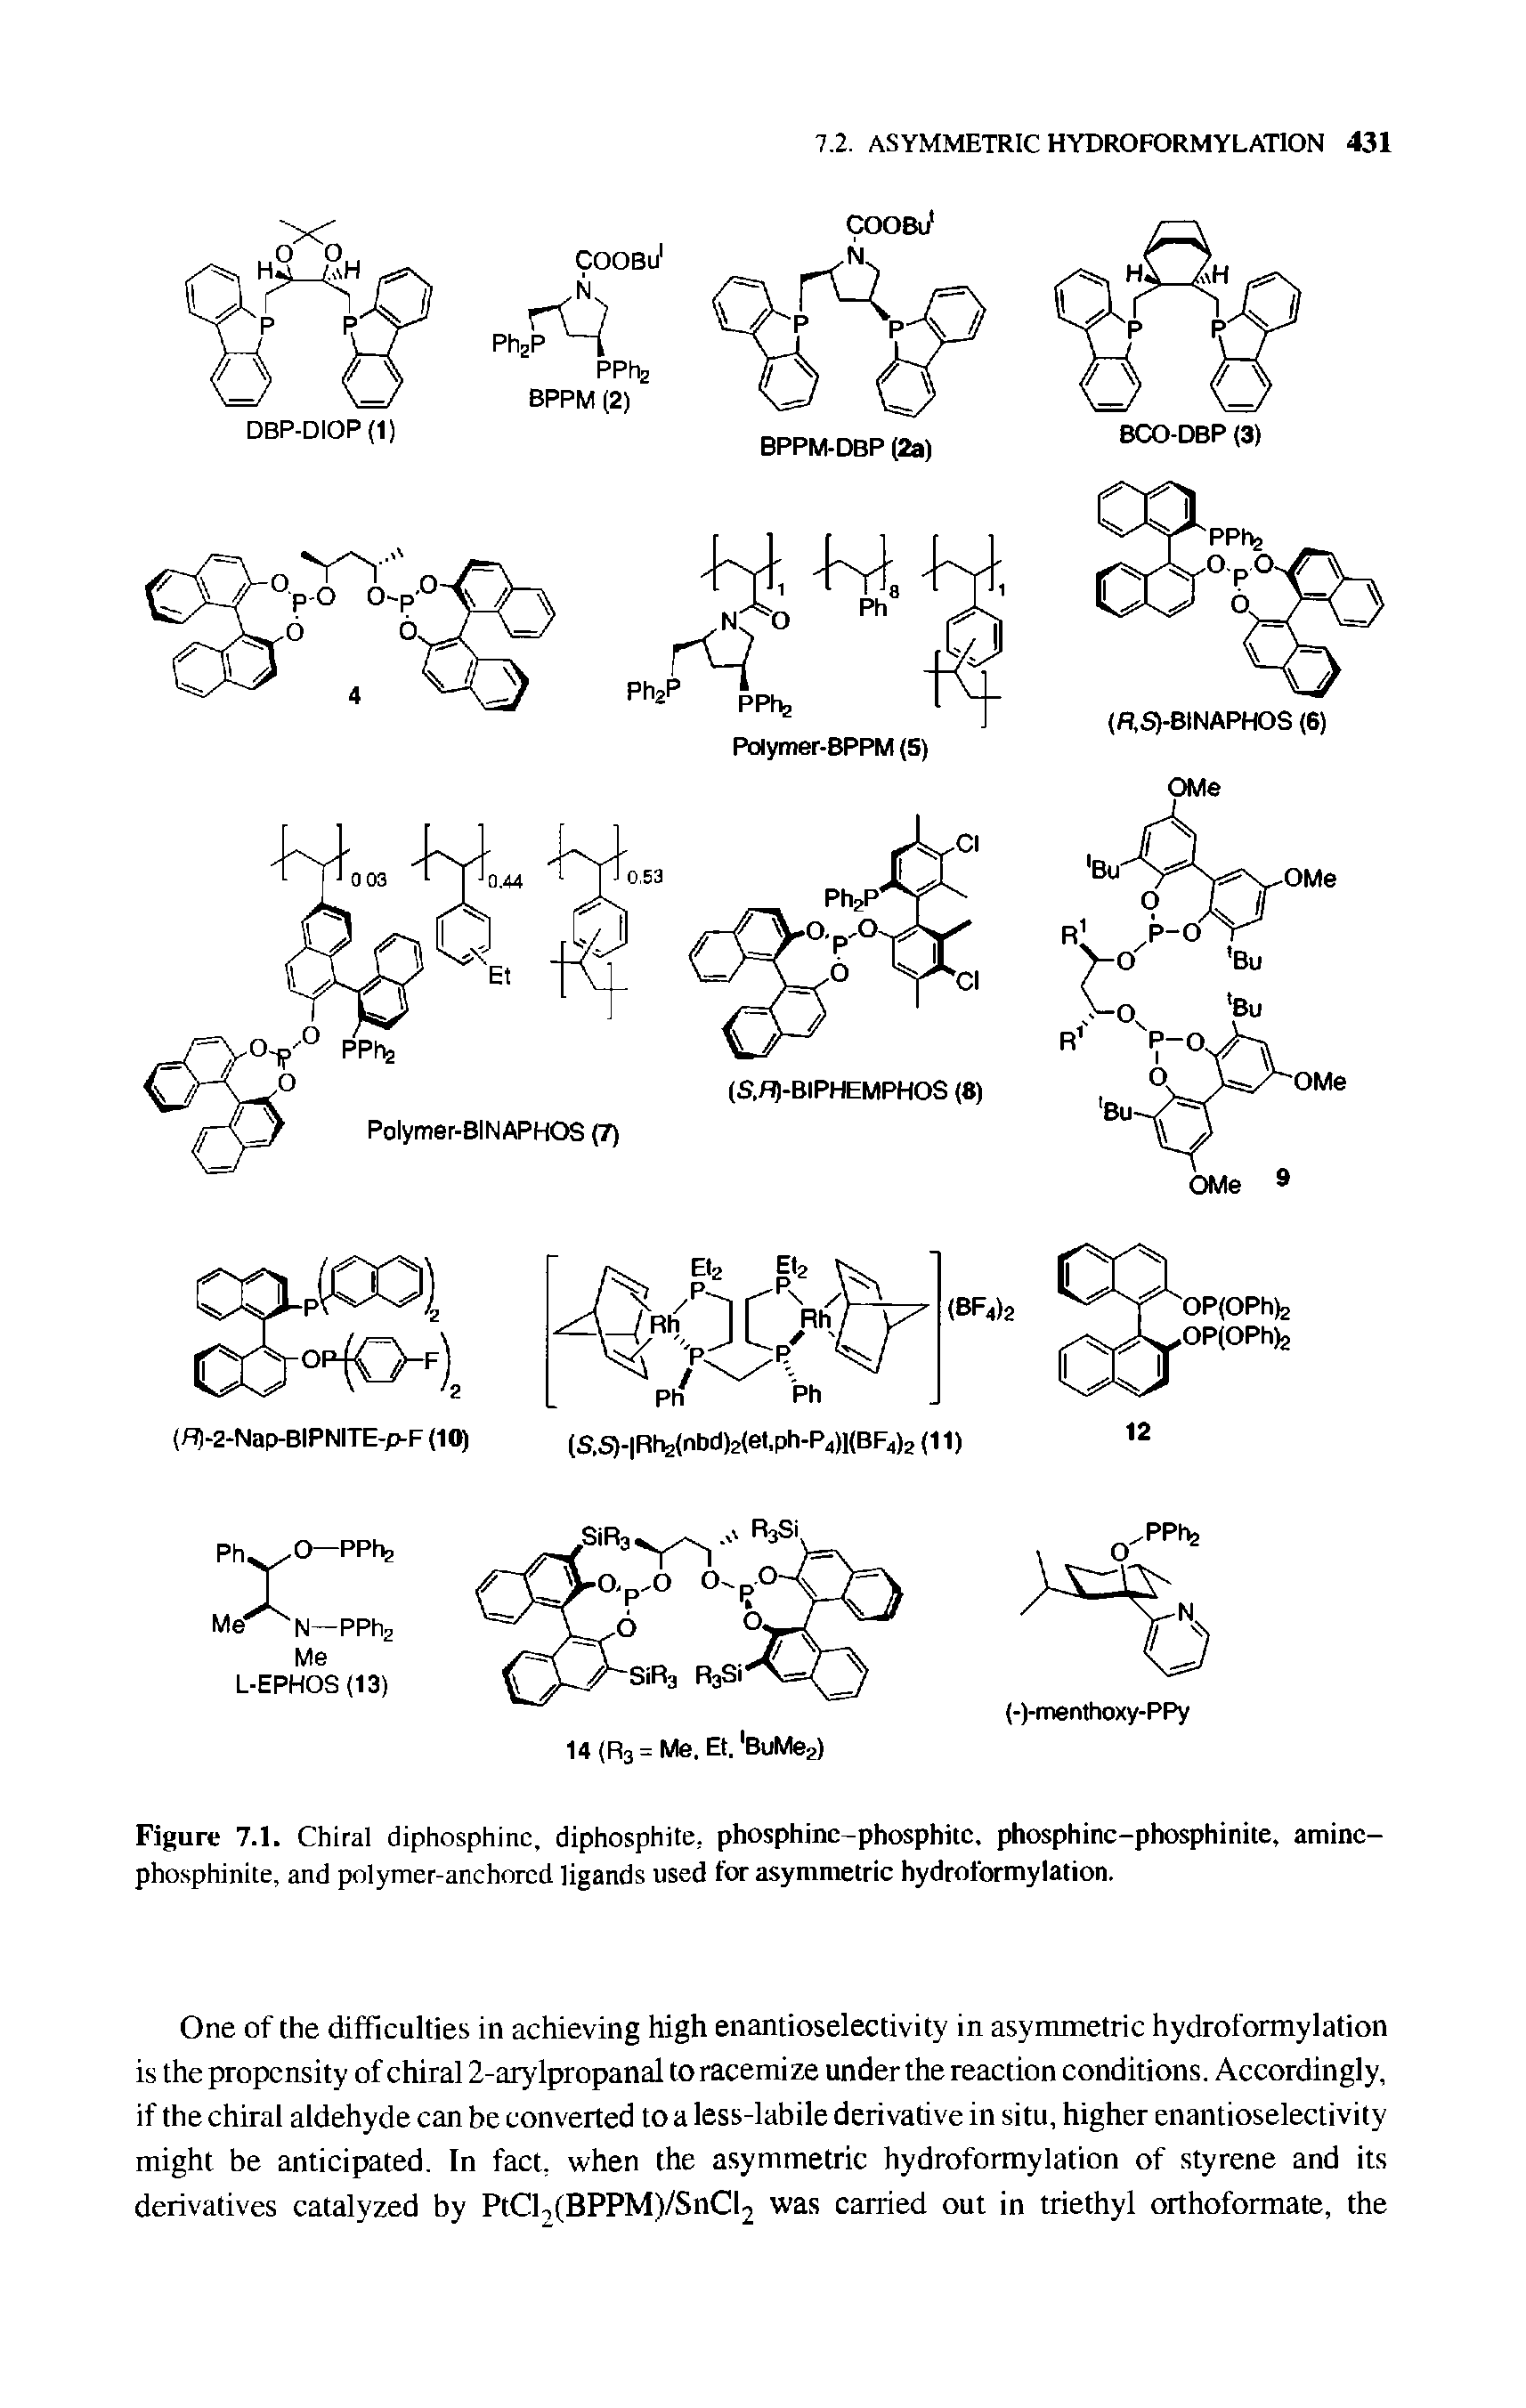 Figure 7.1. Chiral diphosphine, diphosphite, phosphine-phosphite, phosphinc-phosphinite, aminc-phosphinite, and polymer-anchored ligands used for asymmetric hydroformylation.